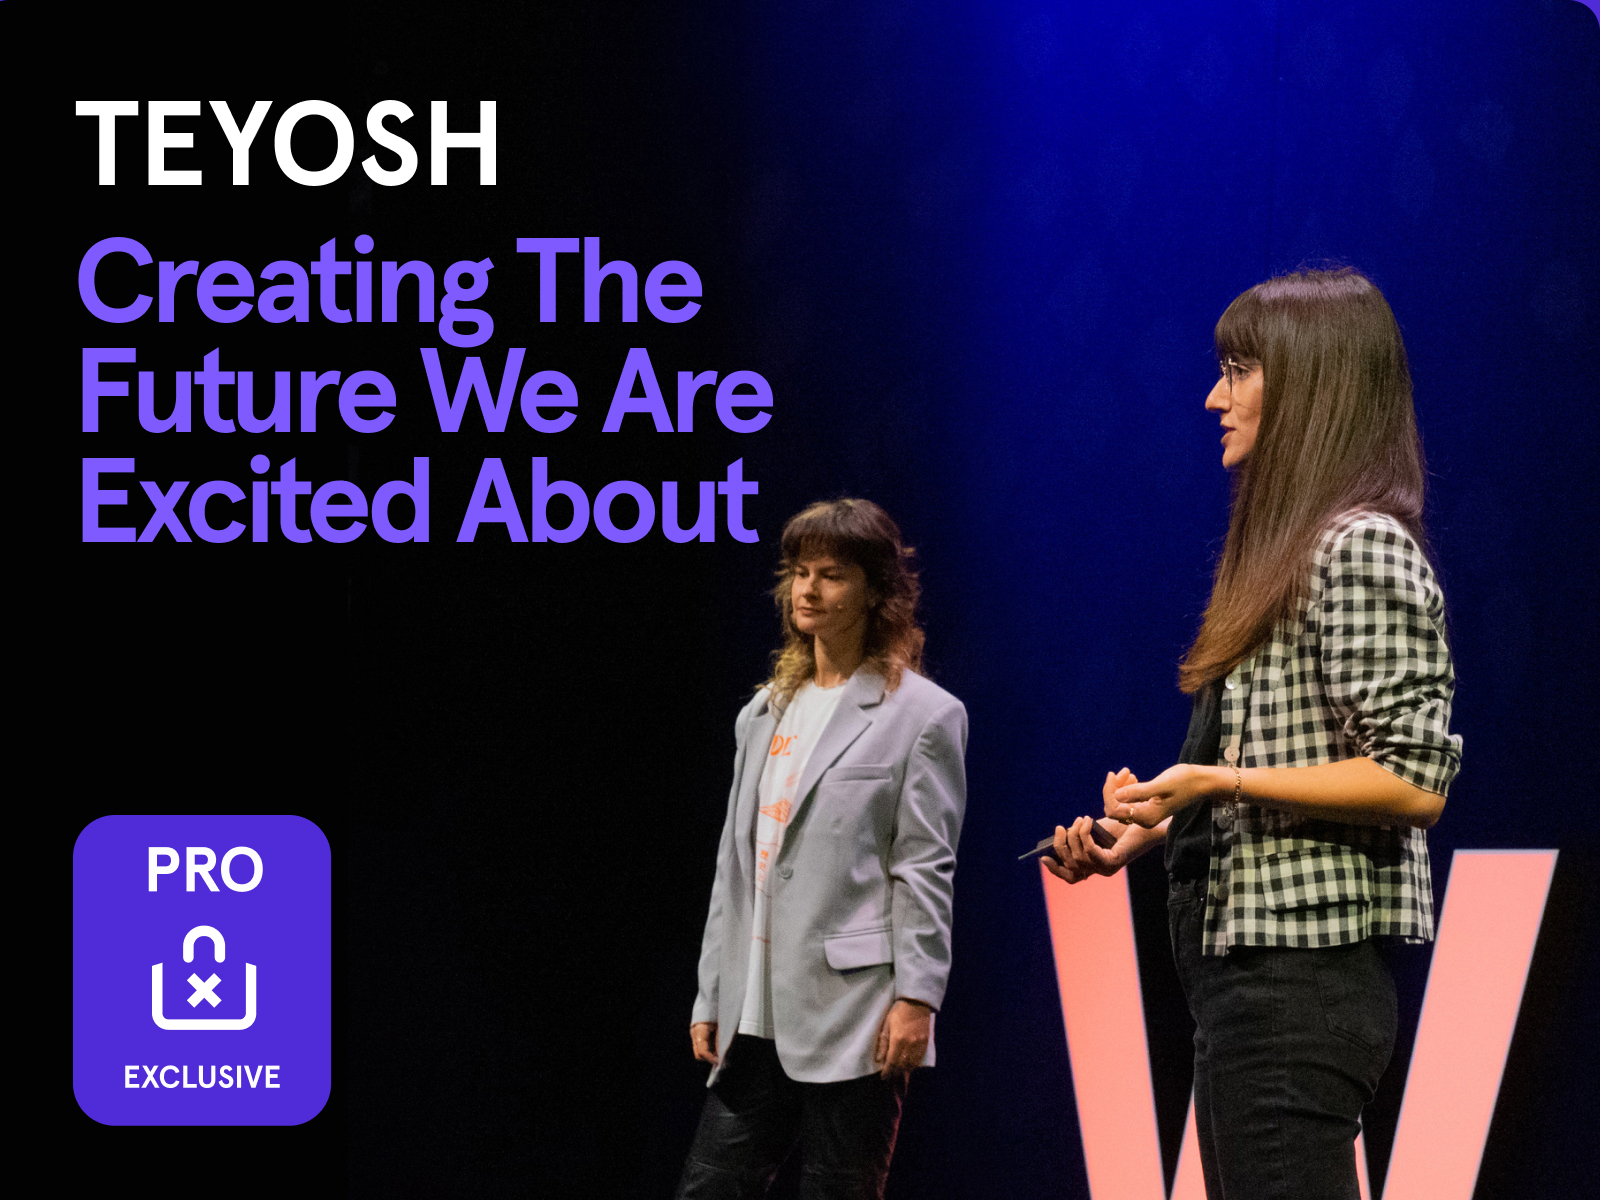 New PRO Content available: watch TEYOSH's new talk from Awwwards Conference Amsterdam